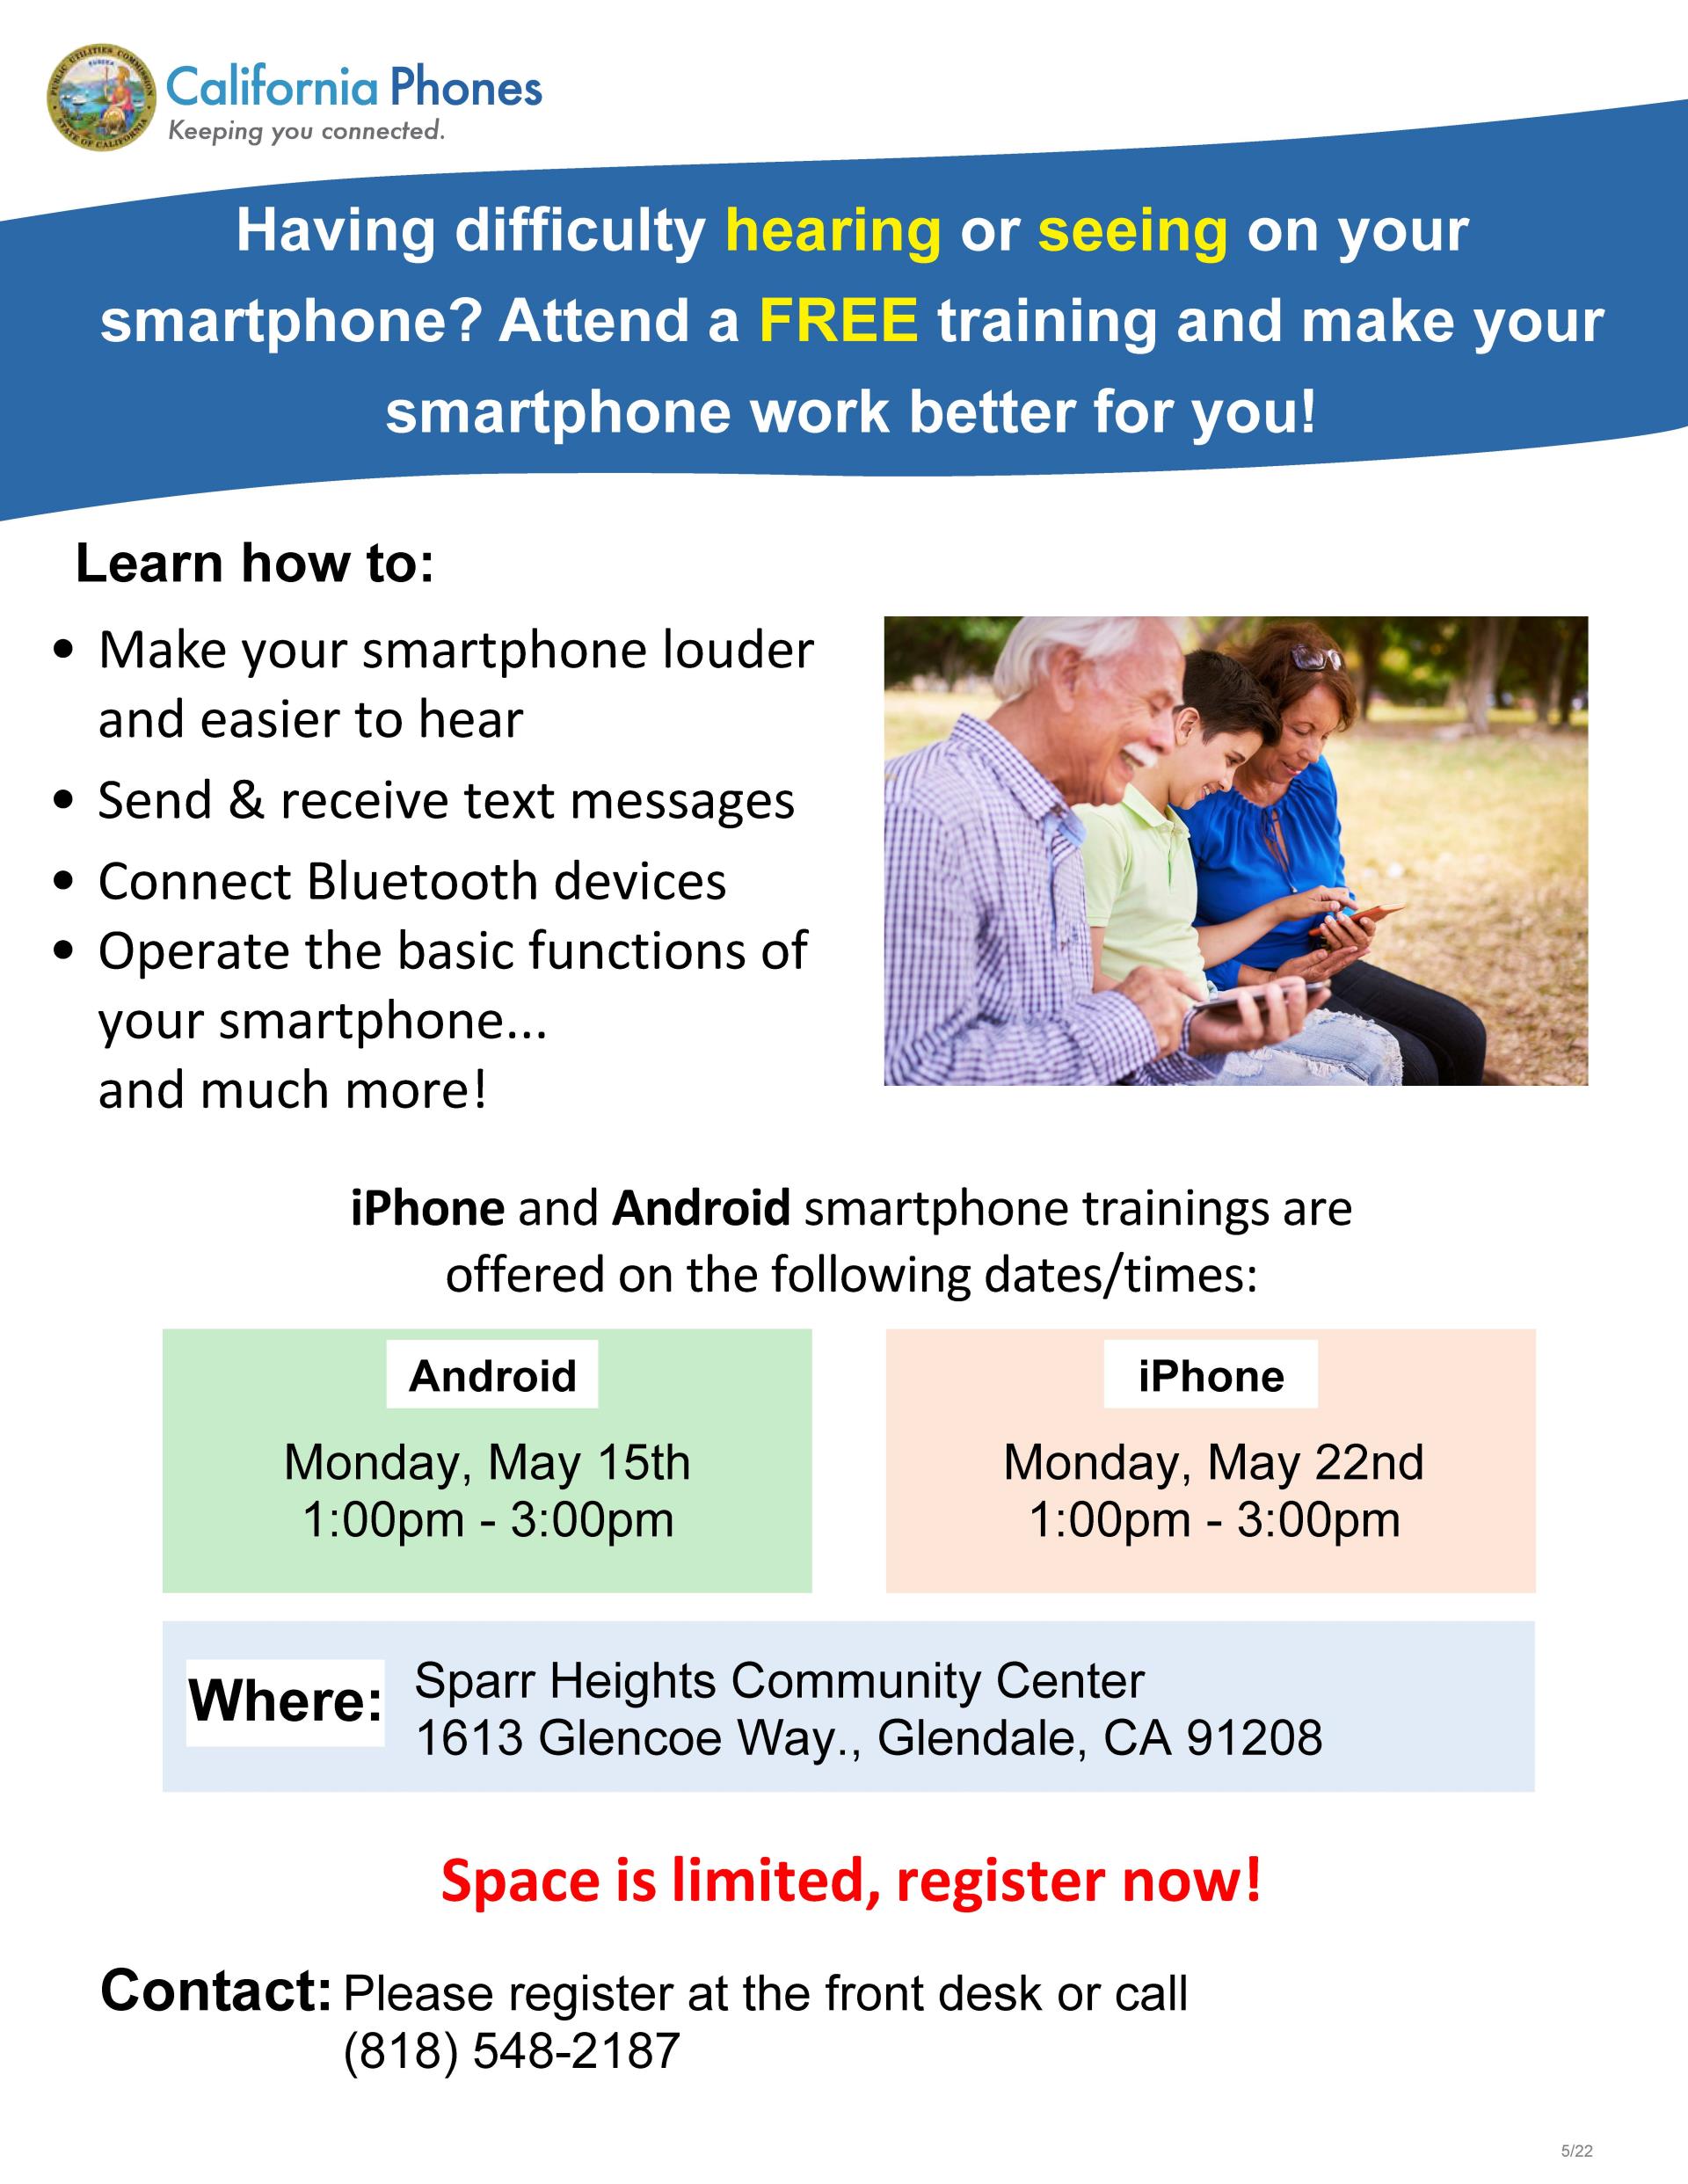 Smartphone Training Flyer - Sparr Heights CC